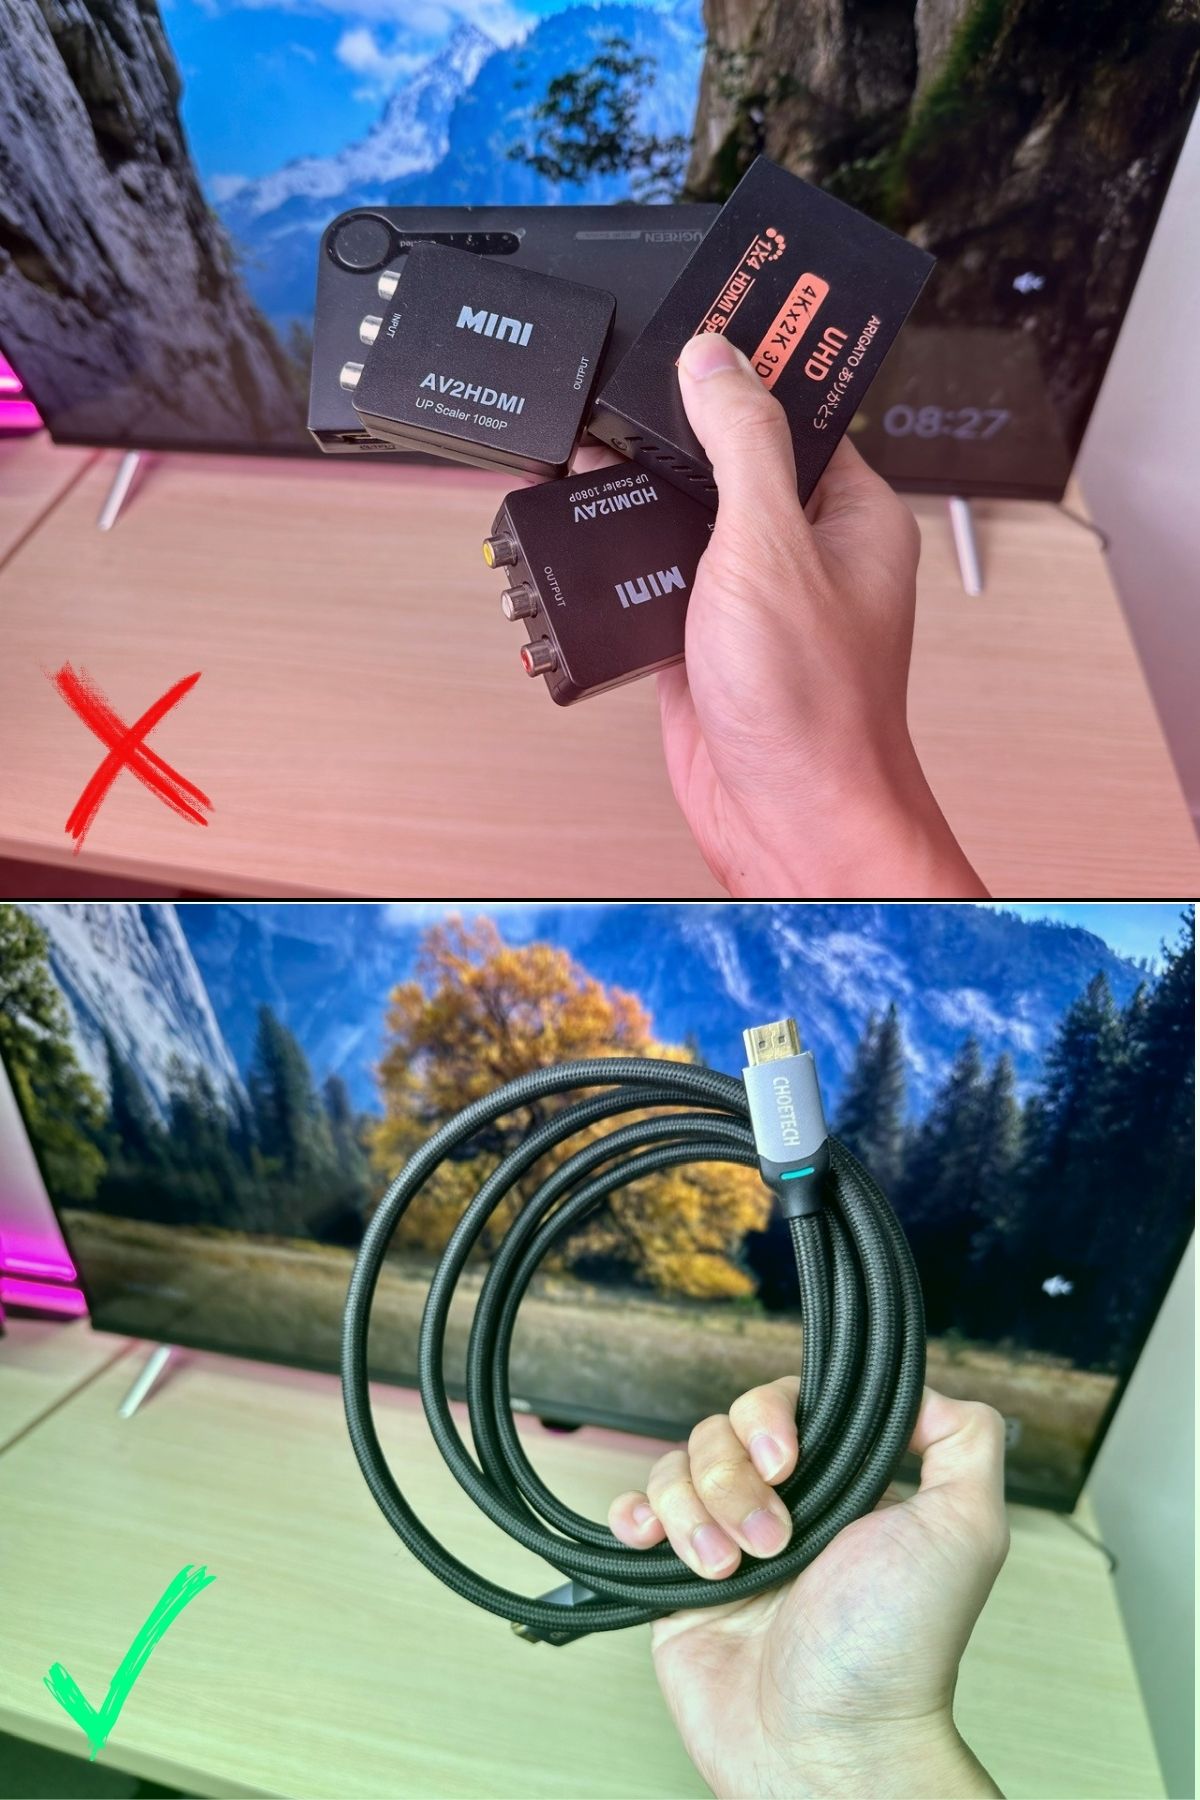 remove hdmi adapters, switches, splitter, etc. use an hdmi cable only